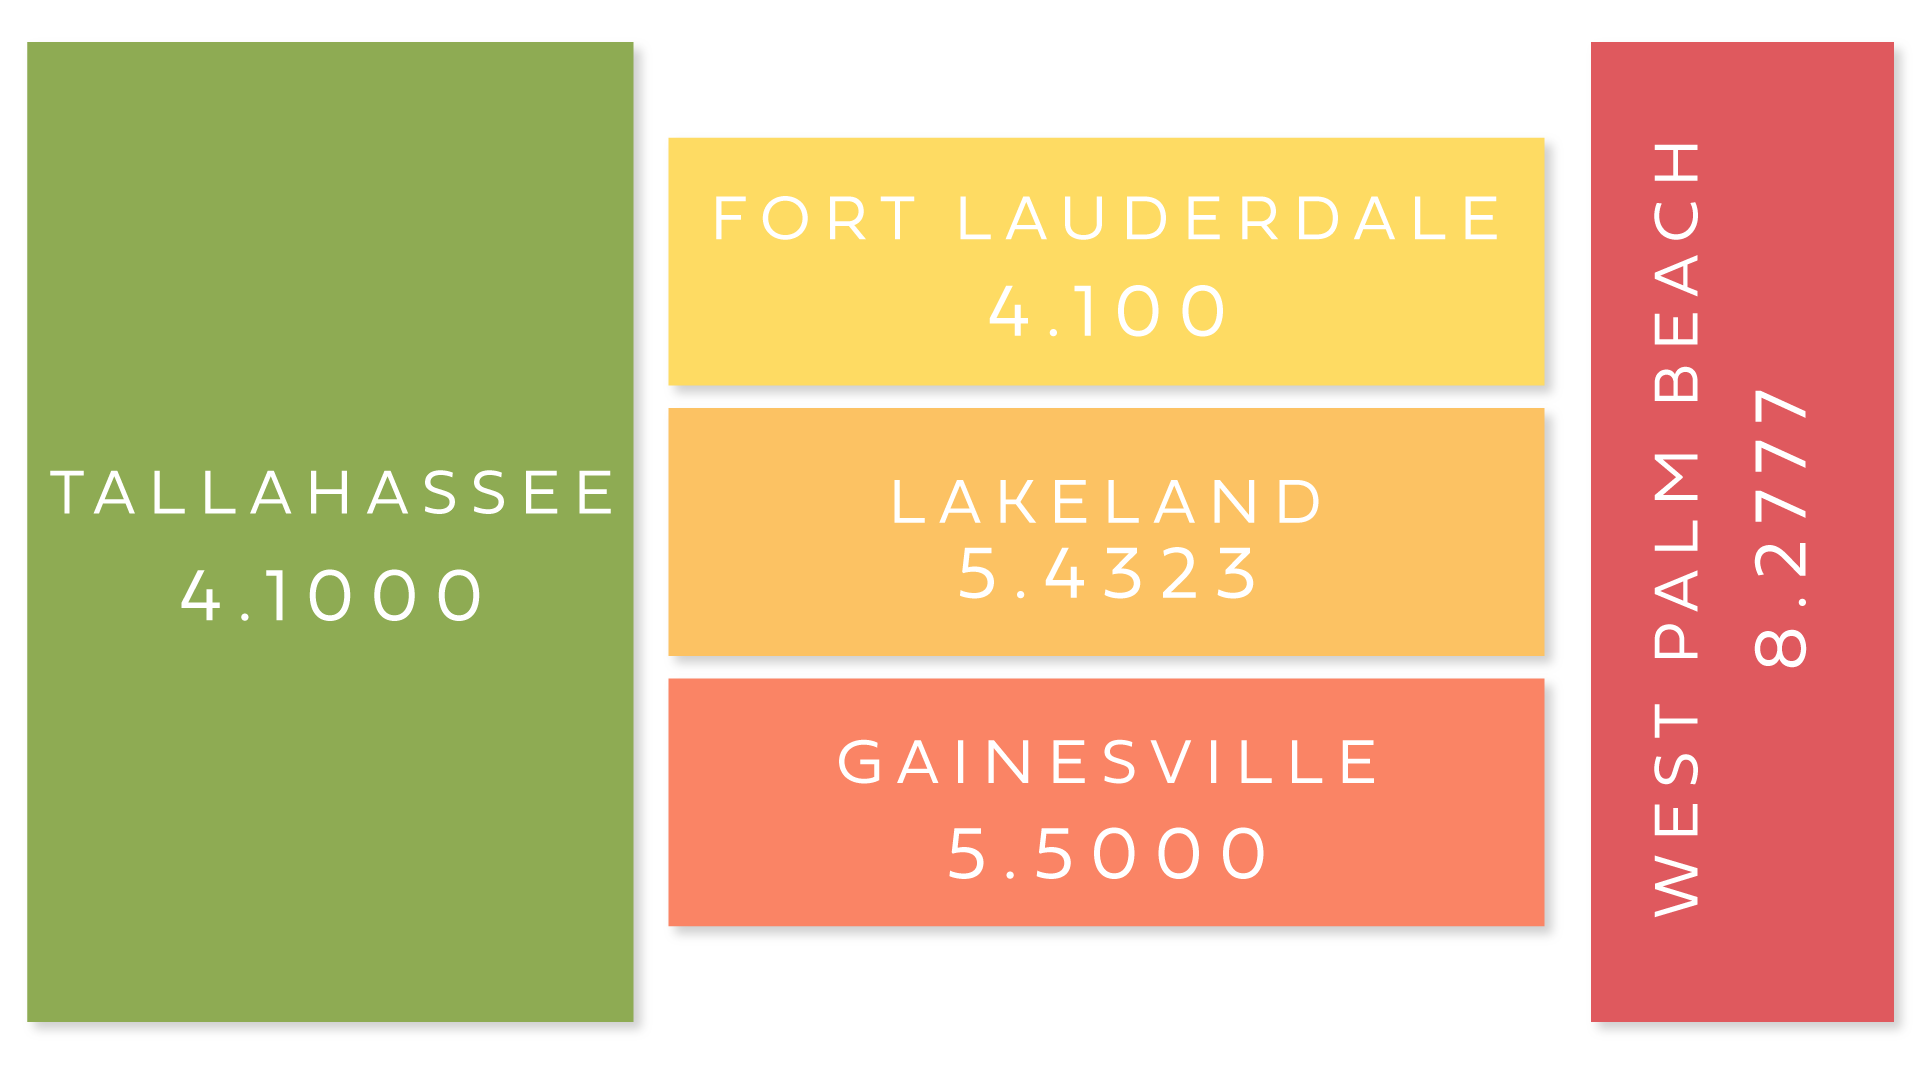 2023 Millage Rates - Tallahassee: 4.1000, Fort Lauderdale: 4.4026, Gainesville: 5.500, Lakeland: 5.4323, West Palm Beach: 8.2777